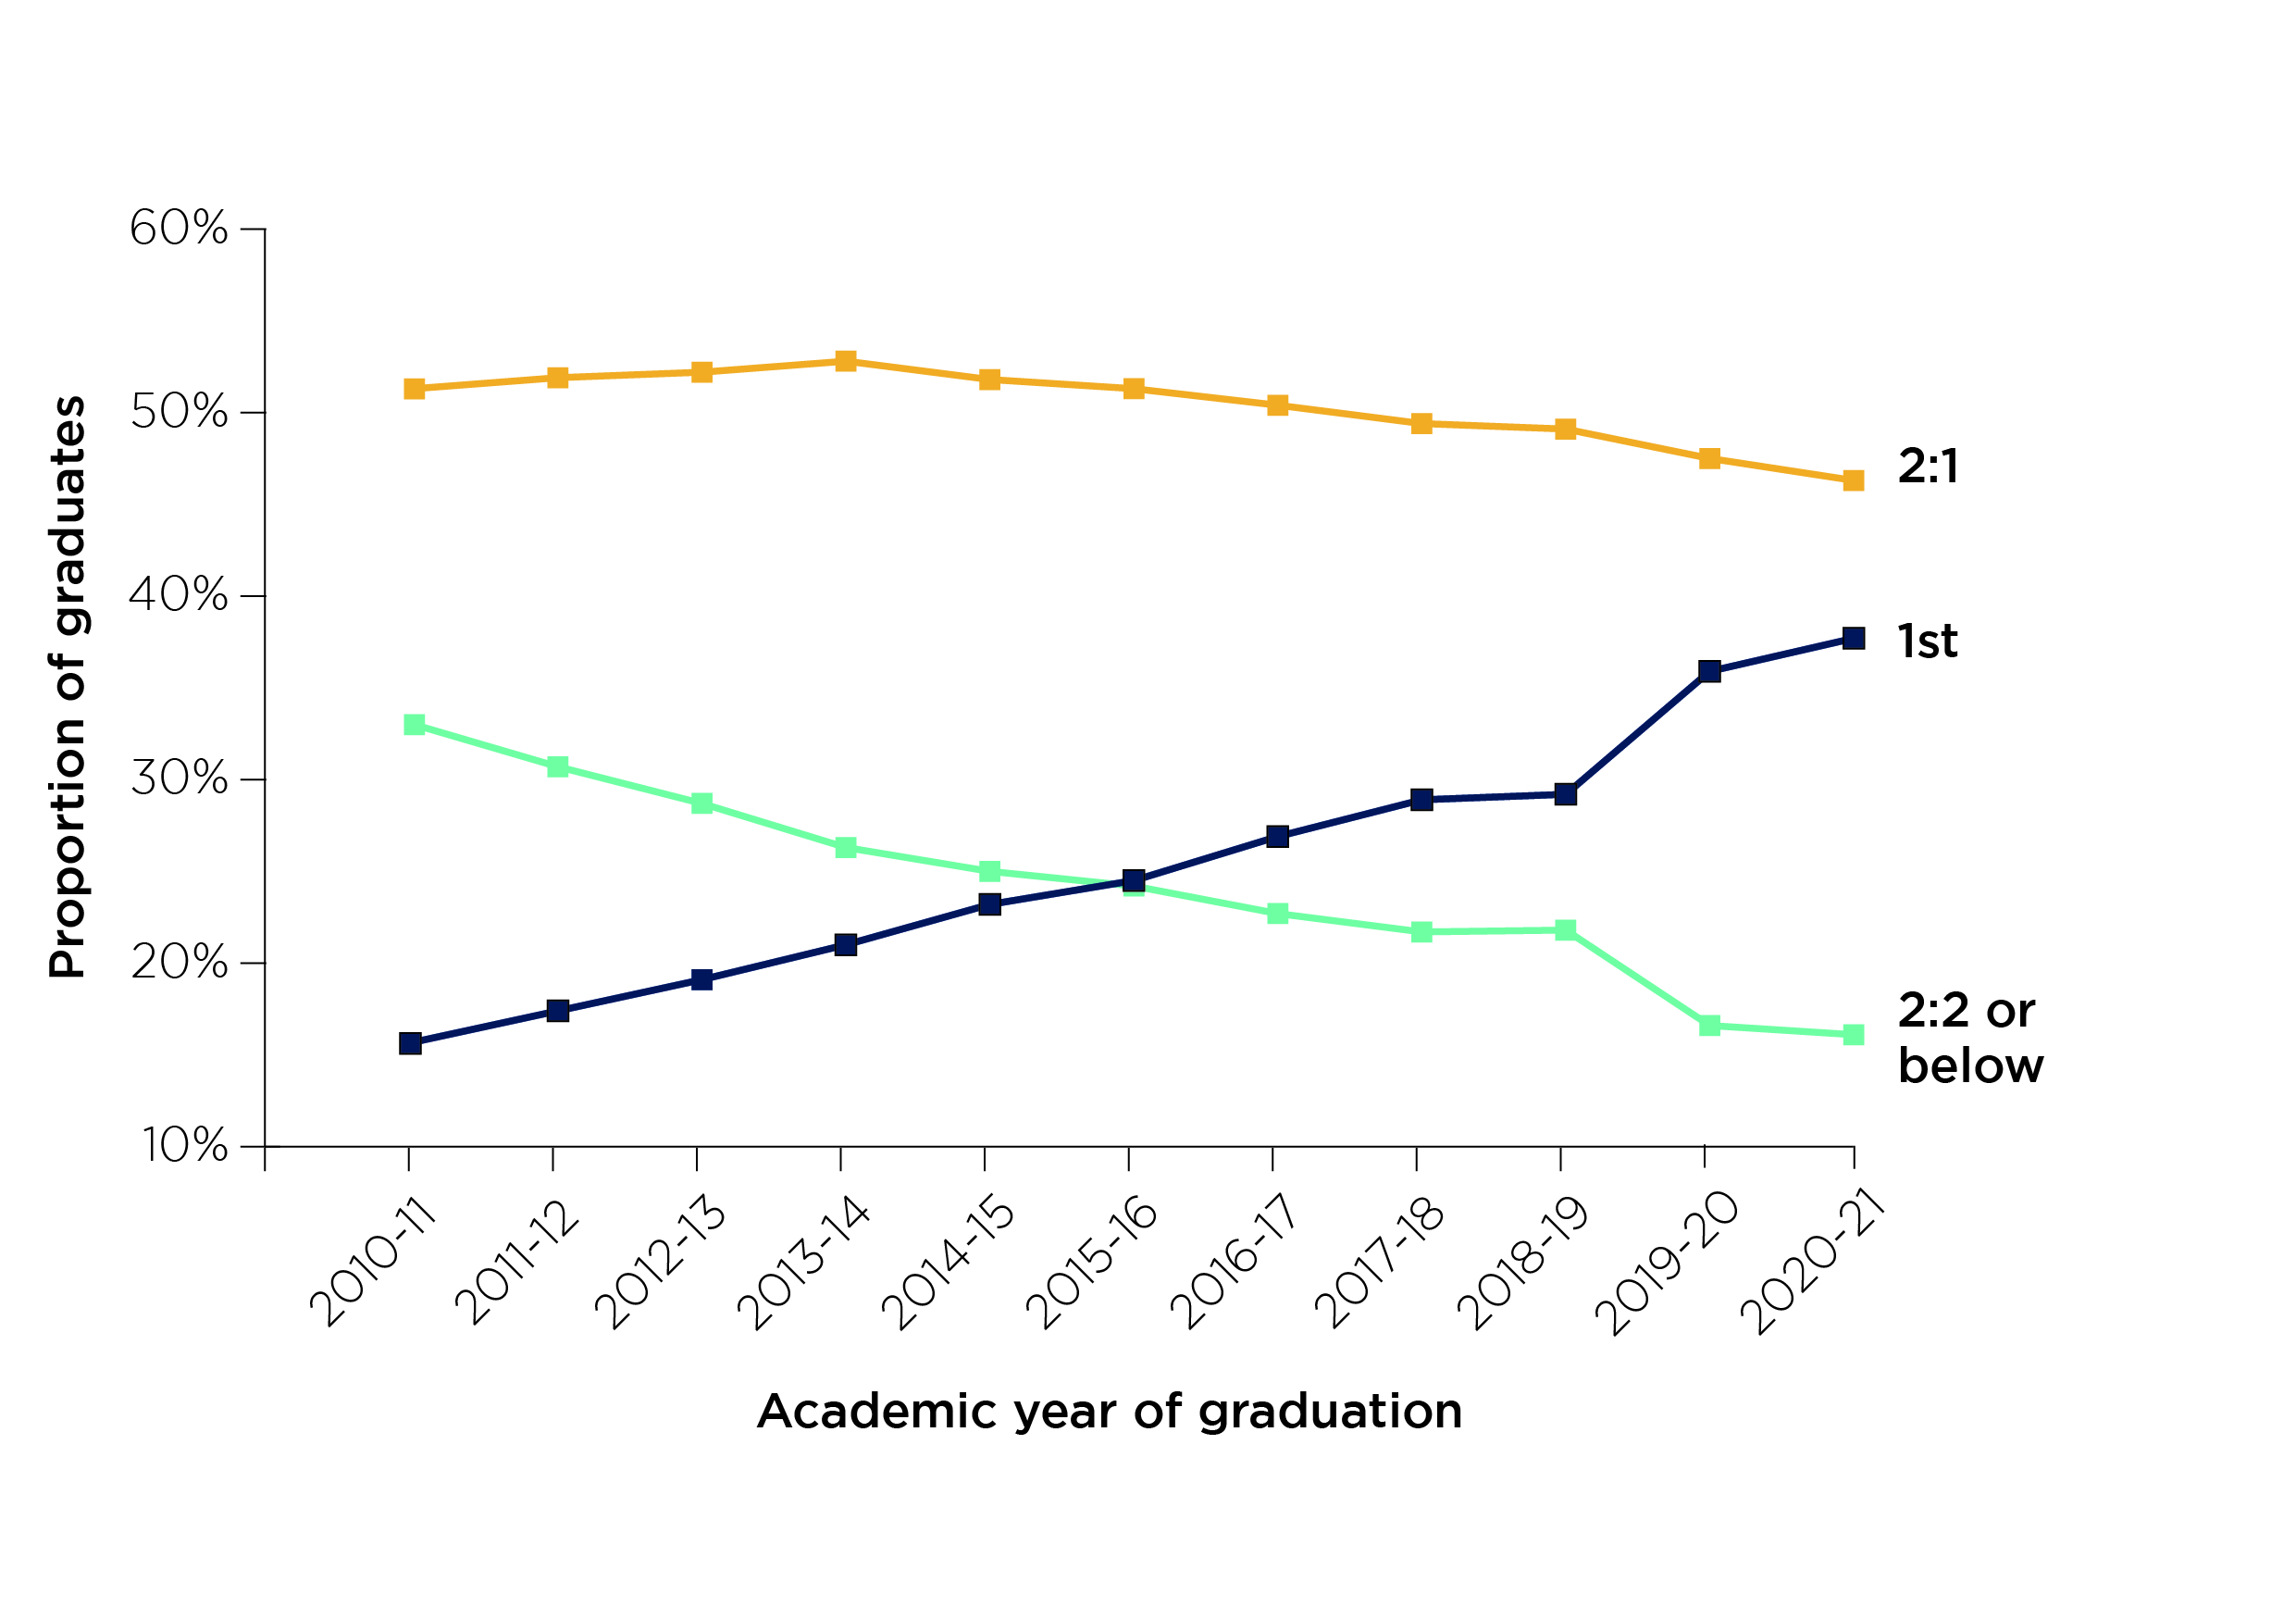 Figure 1: Degree classifications over time